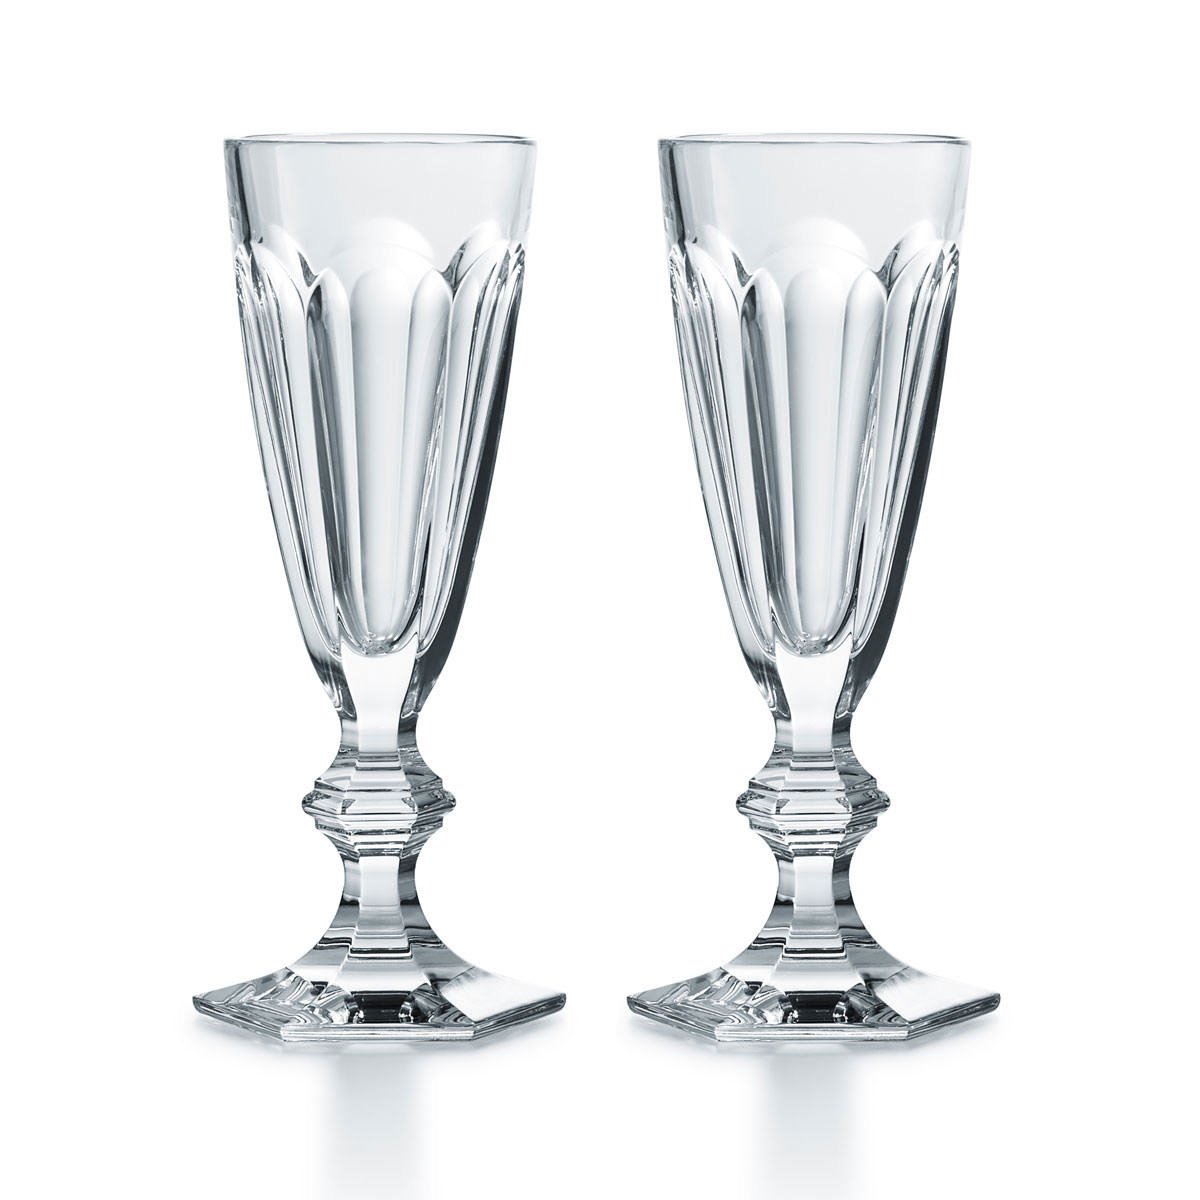 Baccarat Crystal, Harcourt 1841 Champagne Crystal Flute, Pair